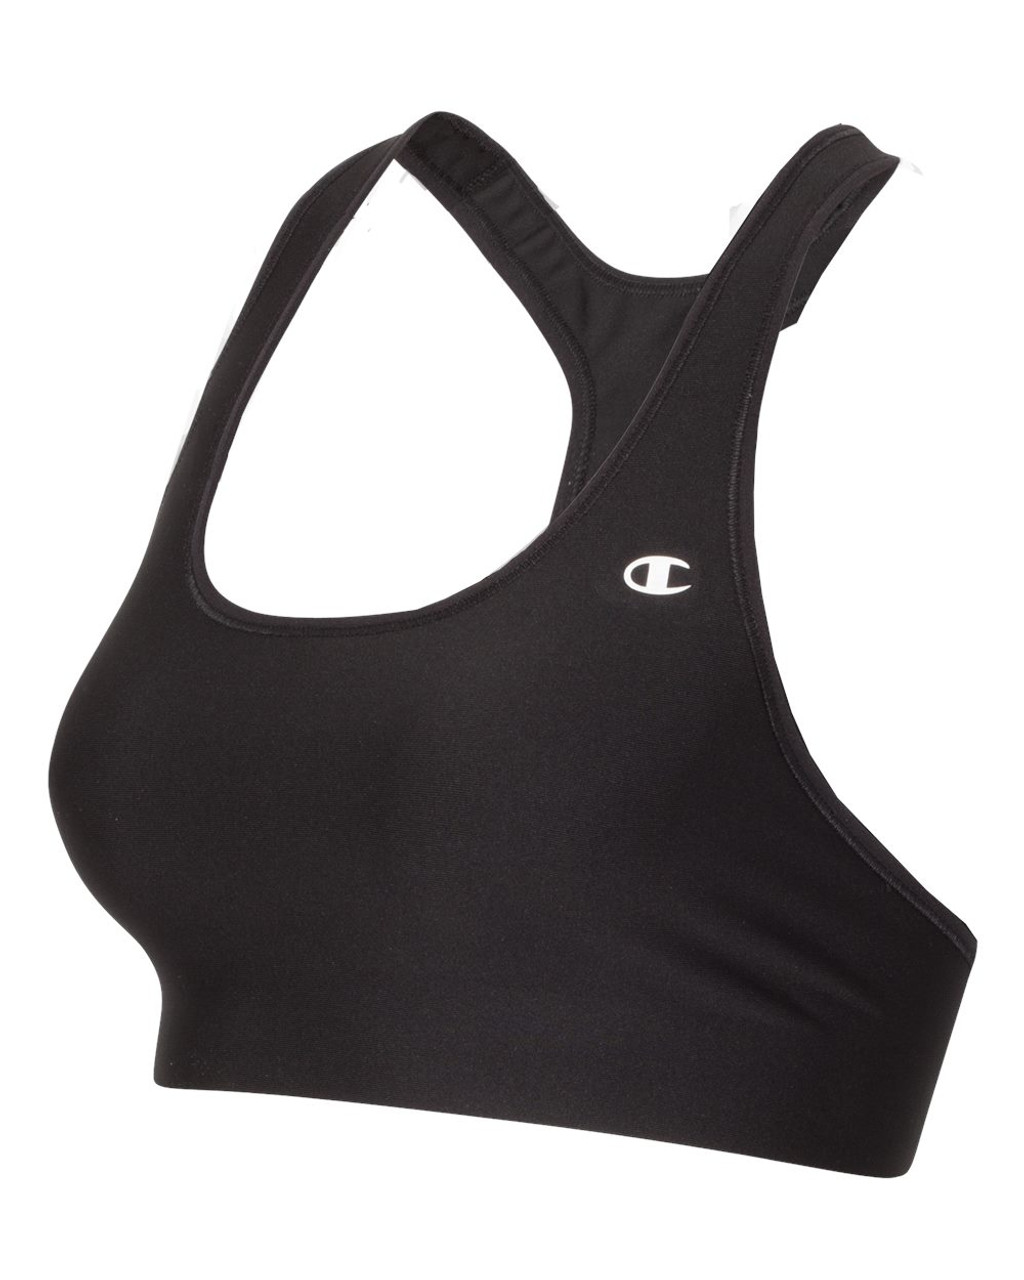 Champion Women's Absolute Sports Bra with SmoothTec Band, Black, X